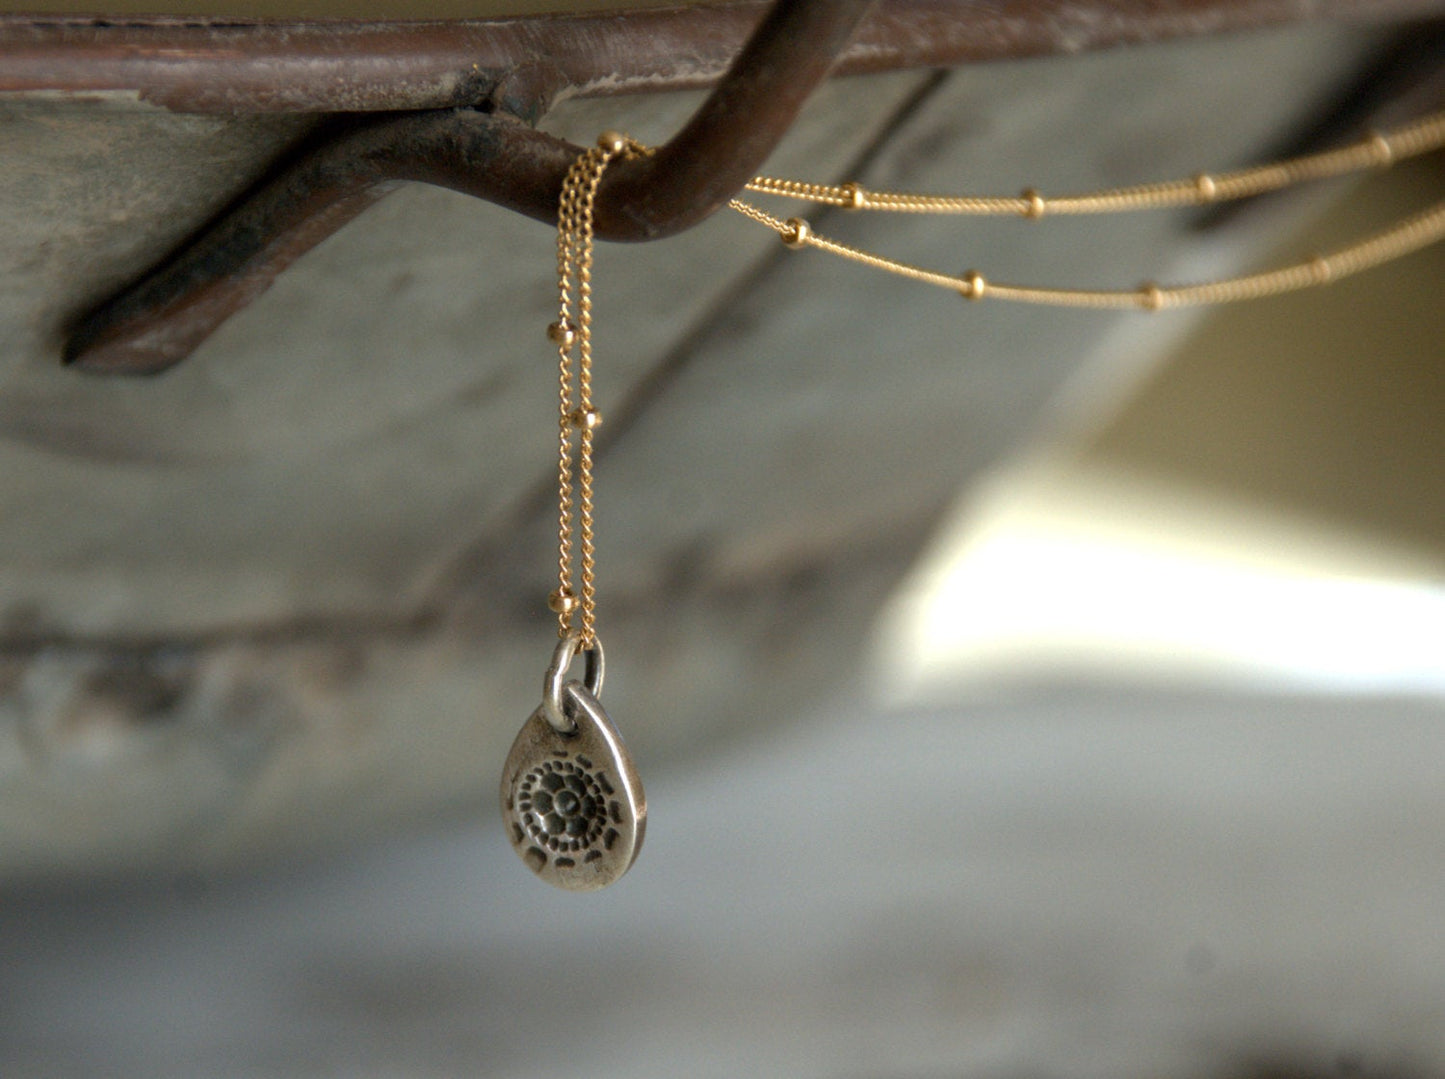 Charleston. Old South Collection Necklace - Oxidized fine Silver. 14 kt Goldfill Satellite chain. Handmade